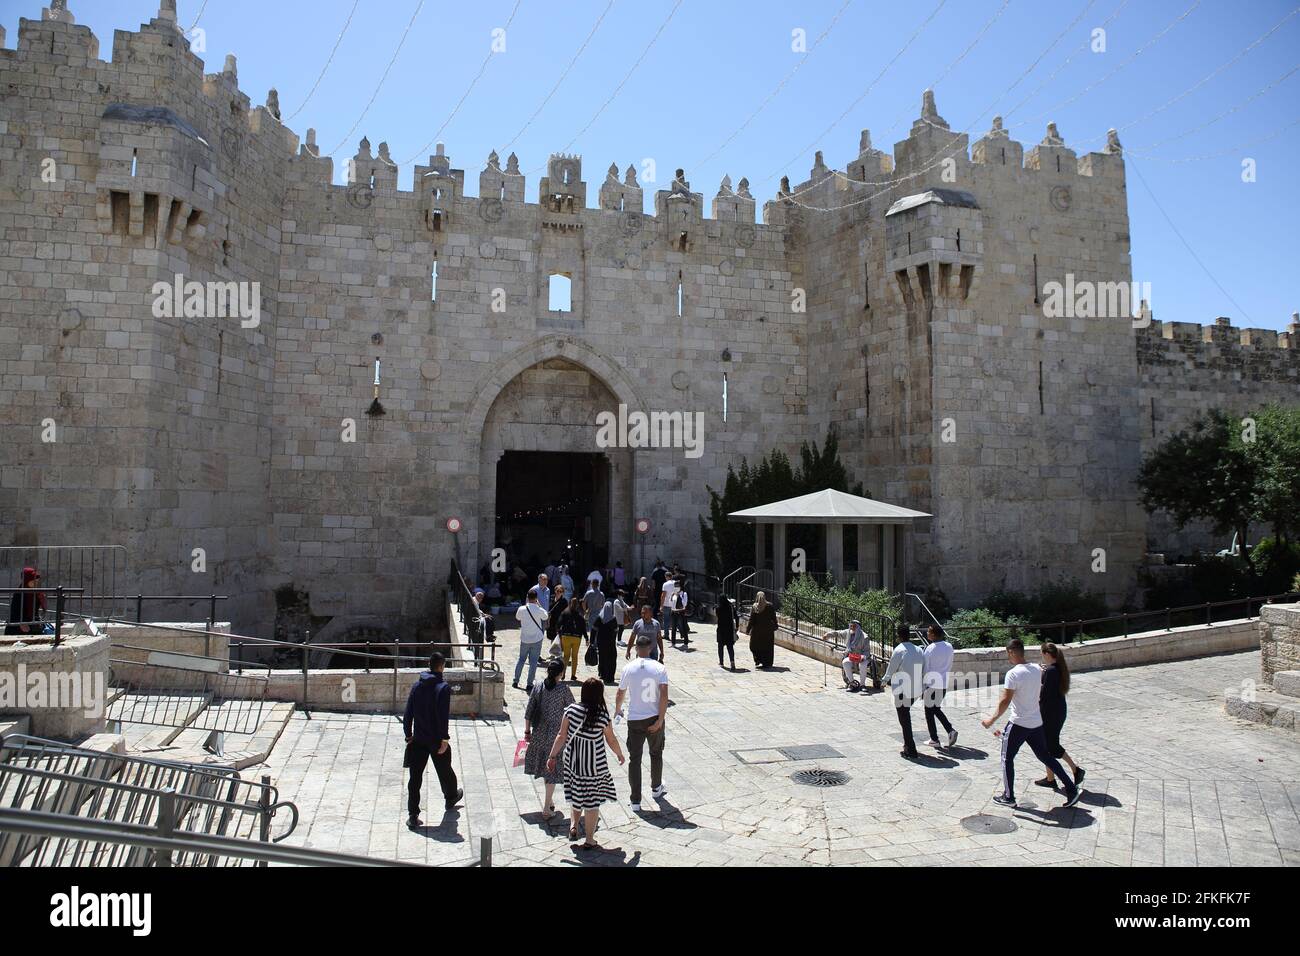 Damascus Gate, one of eight to the Old City of Jerusalem with people going into and out of the walled city. Stock Photo